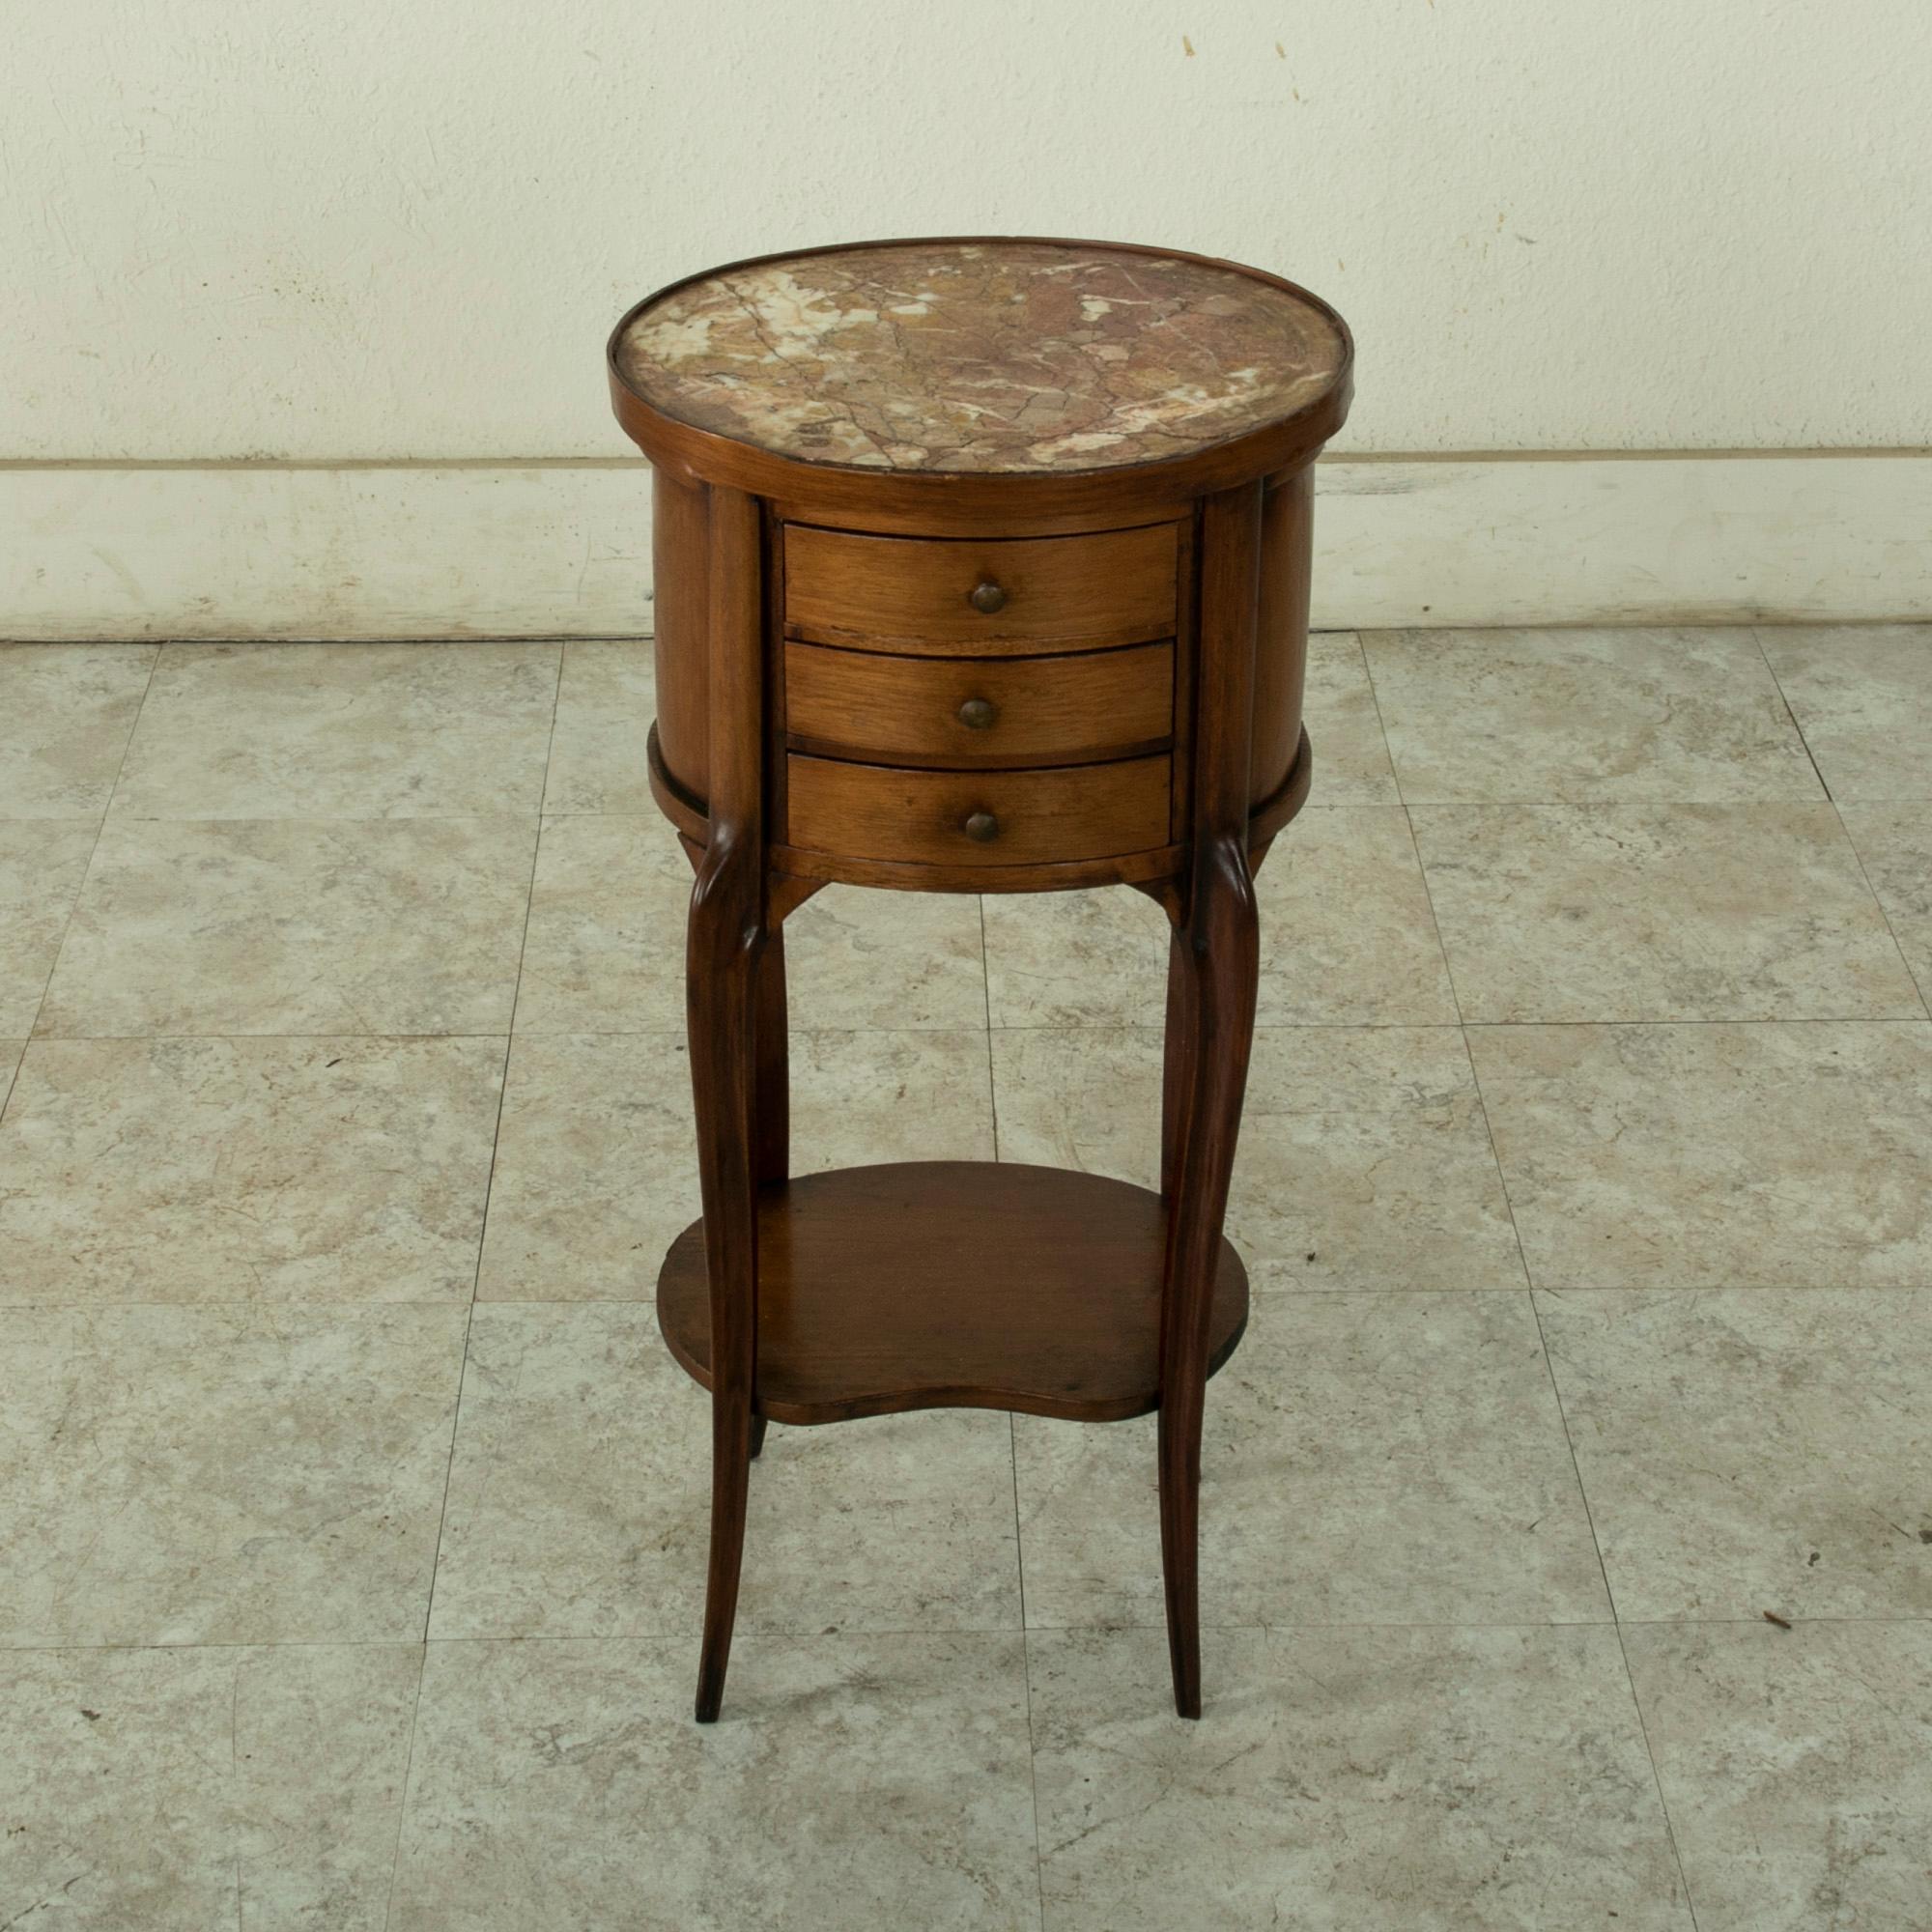 Late 19th Century French Louis XV Style Walnut Side Table with Marble Top In Good Condition For Sale In Fayetteville, AR